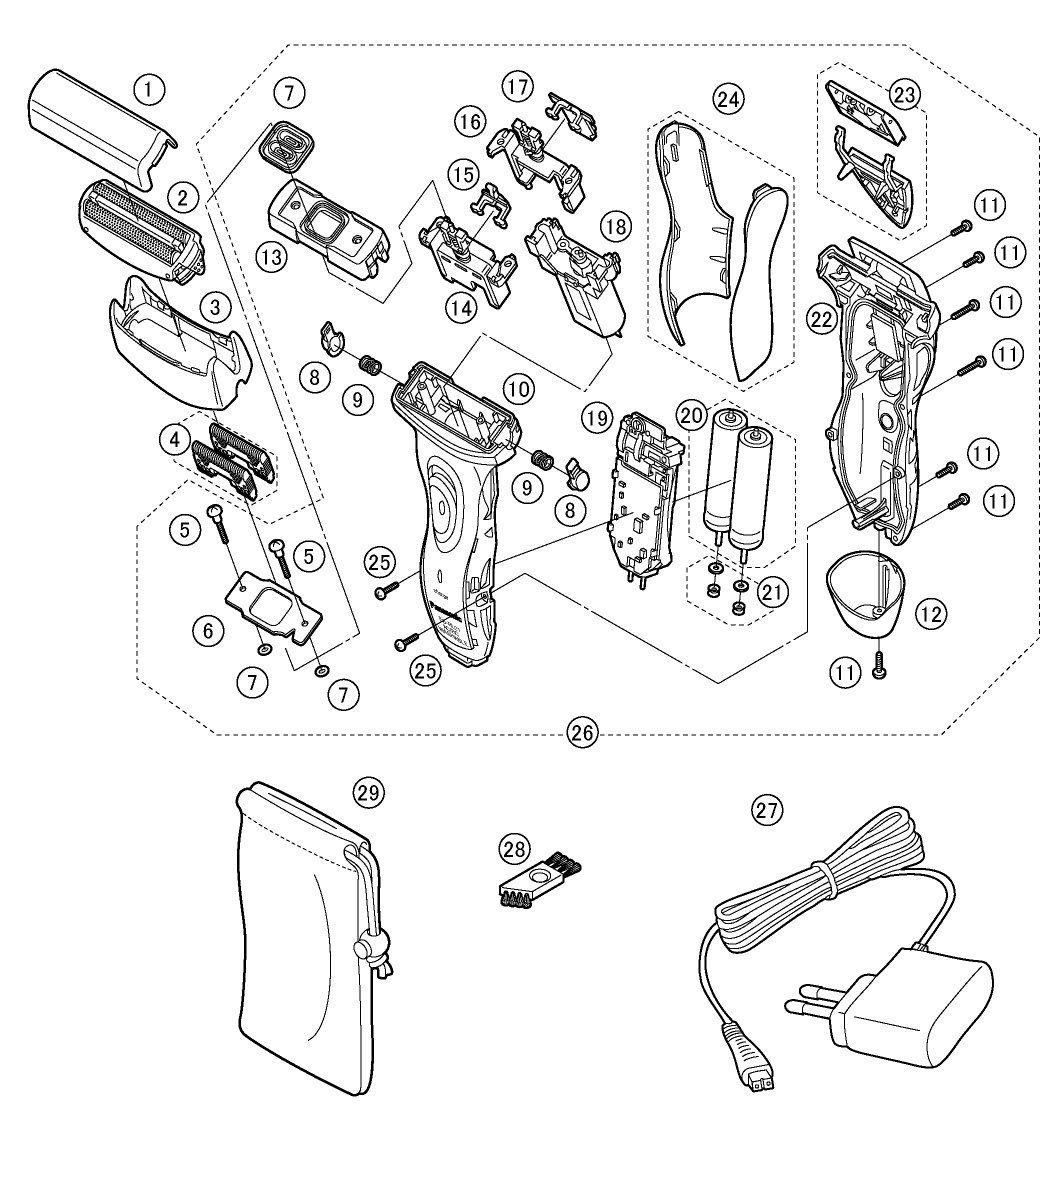 ES-RL21: Exploded View